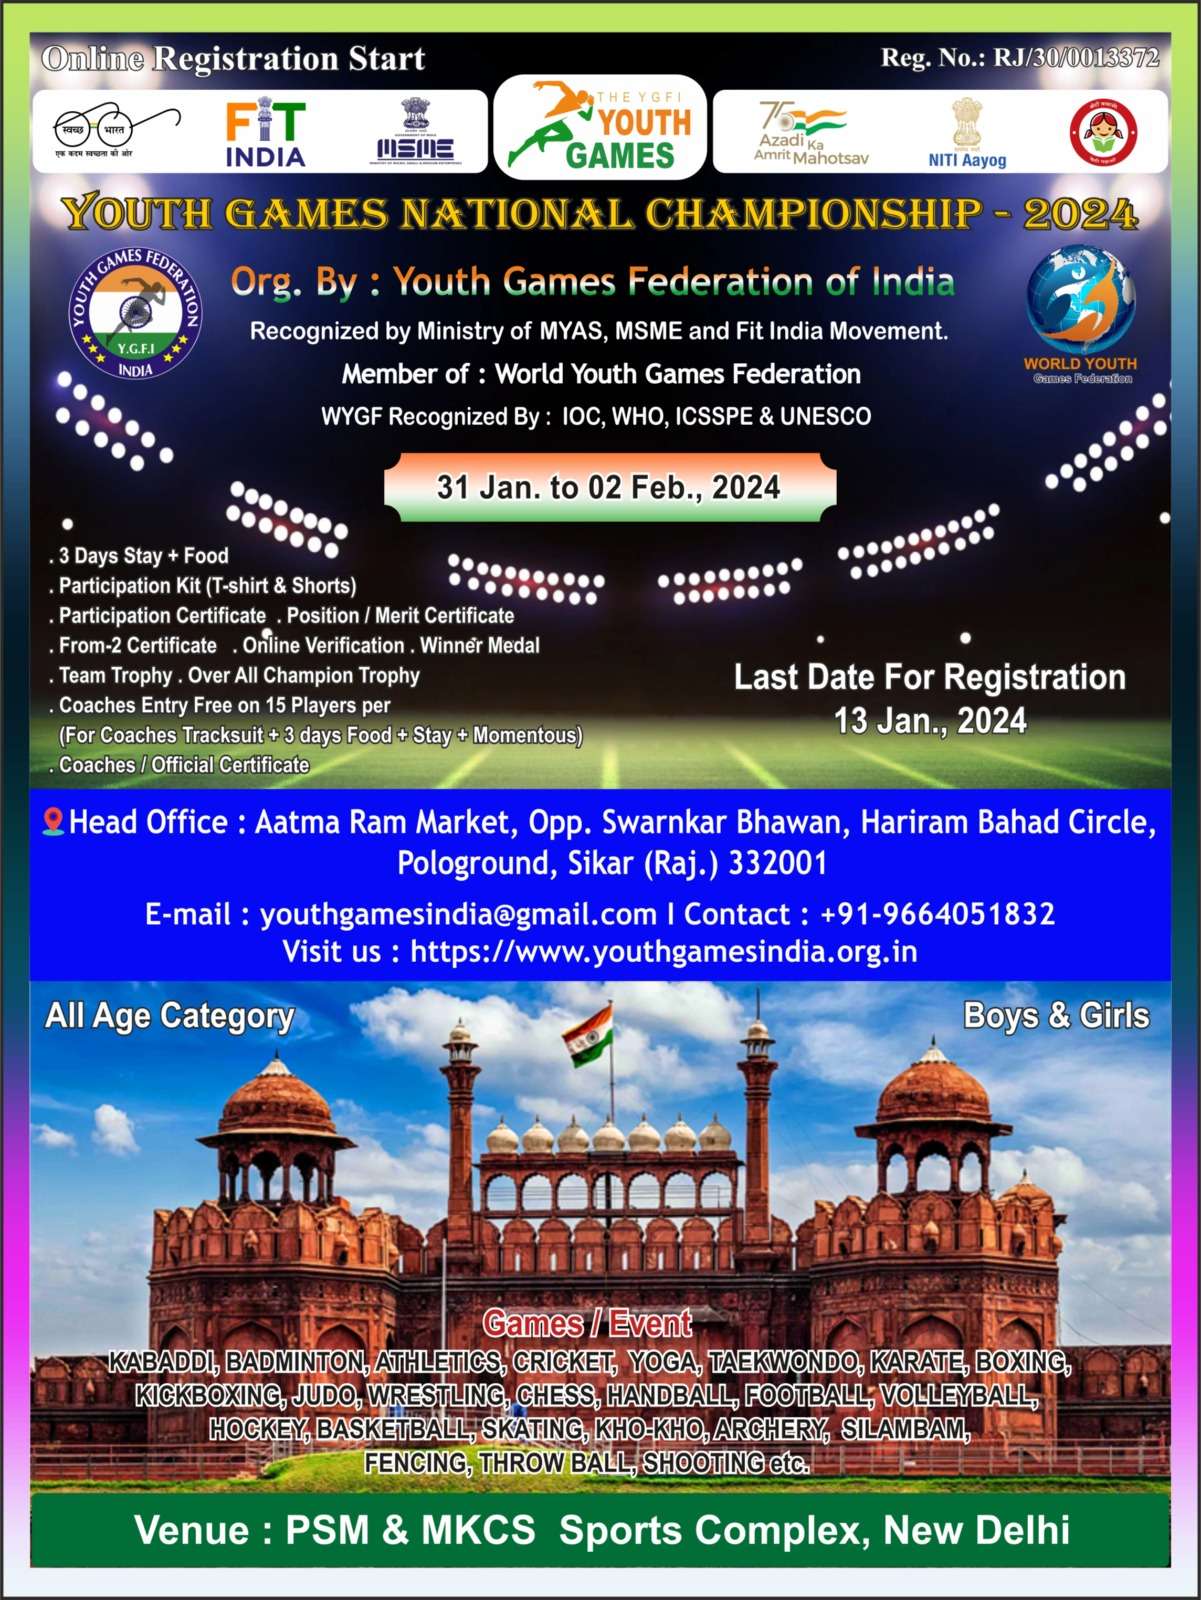 YOUTH GAMES NATIONAL CHAMPIONSHIP - 2024